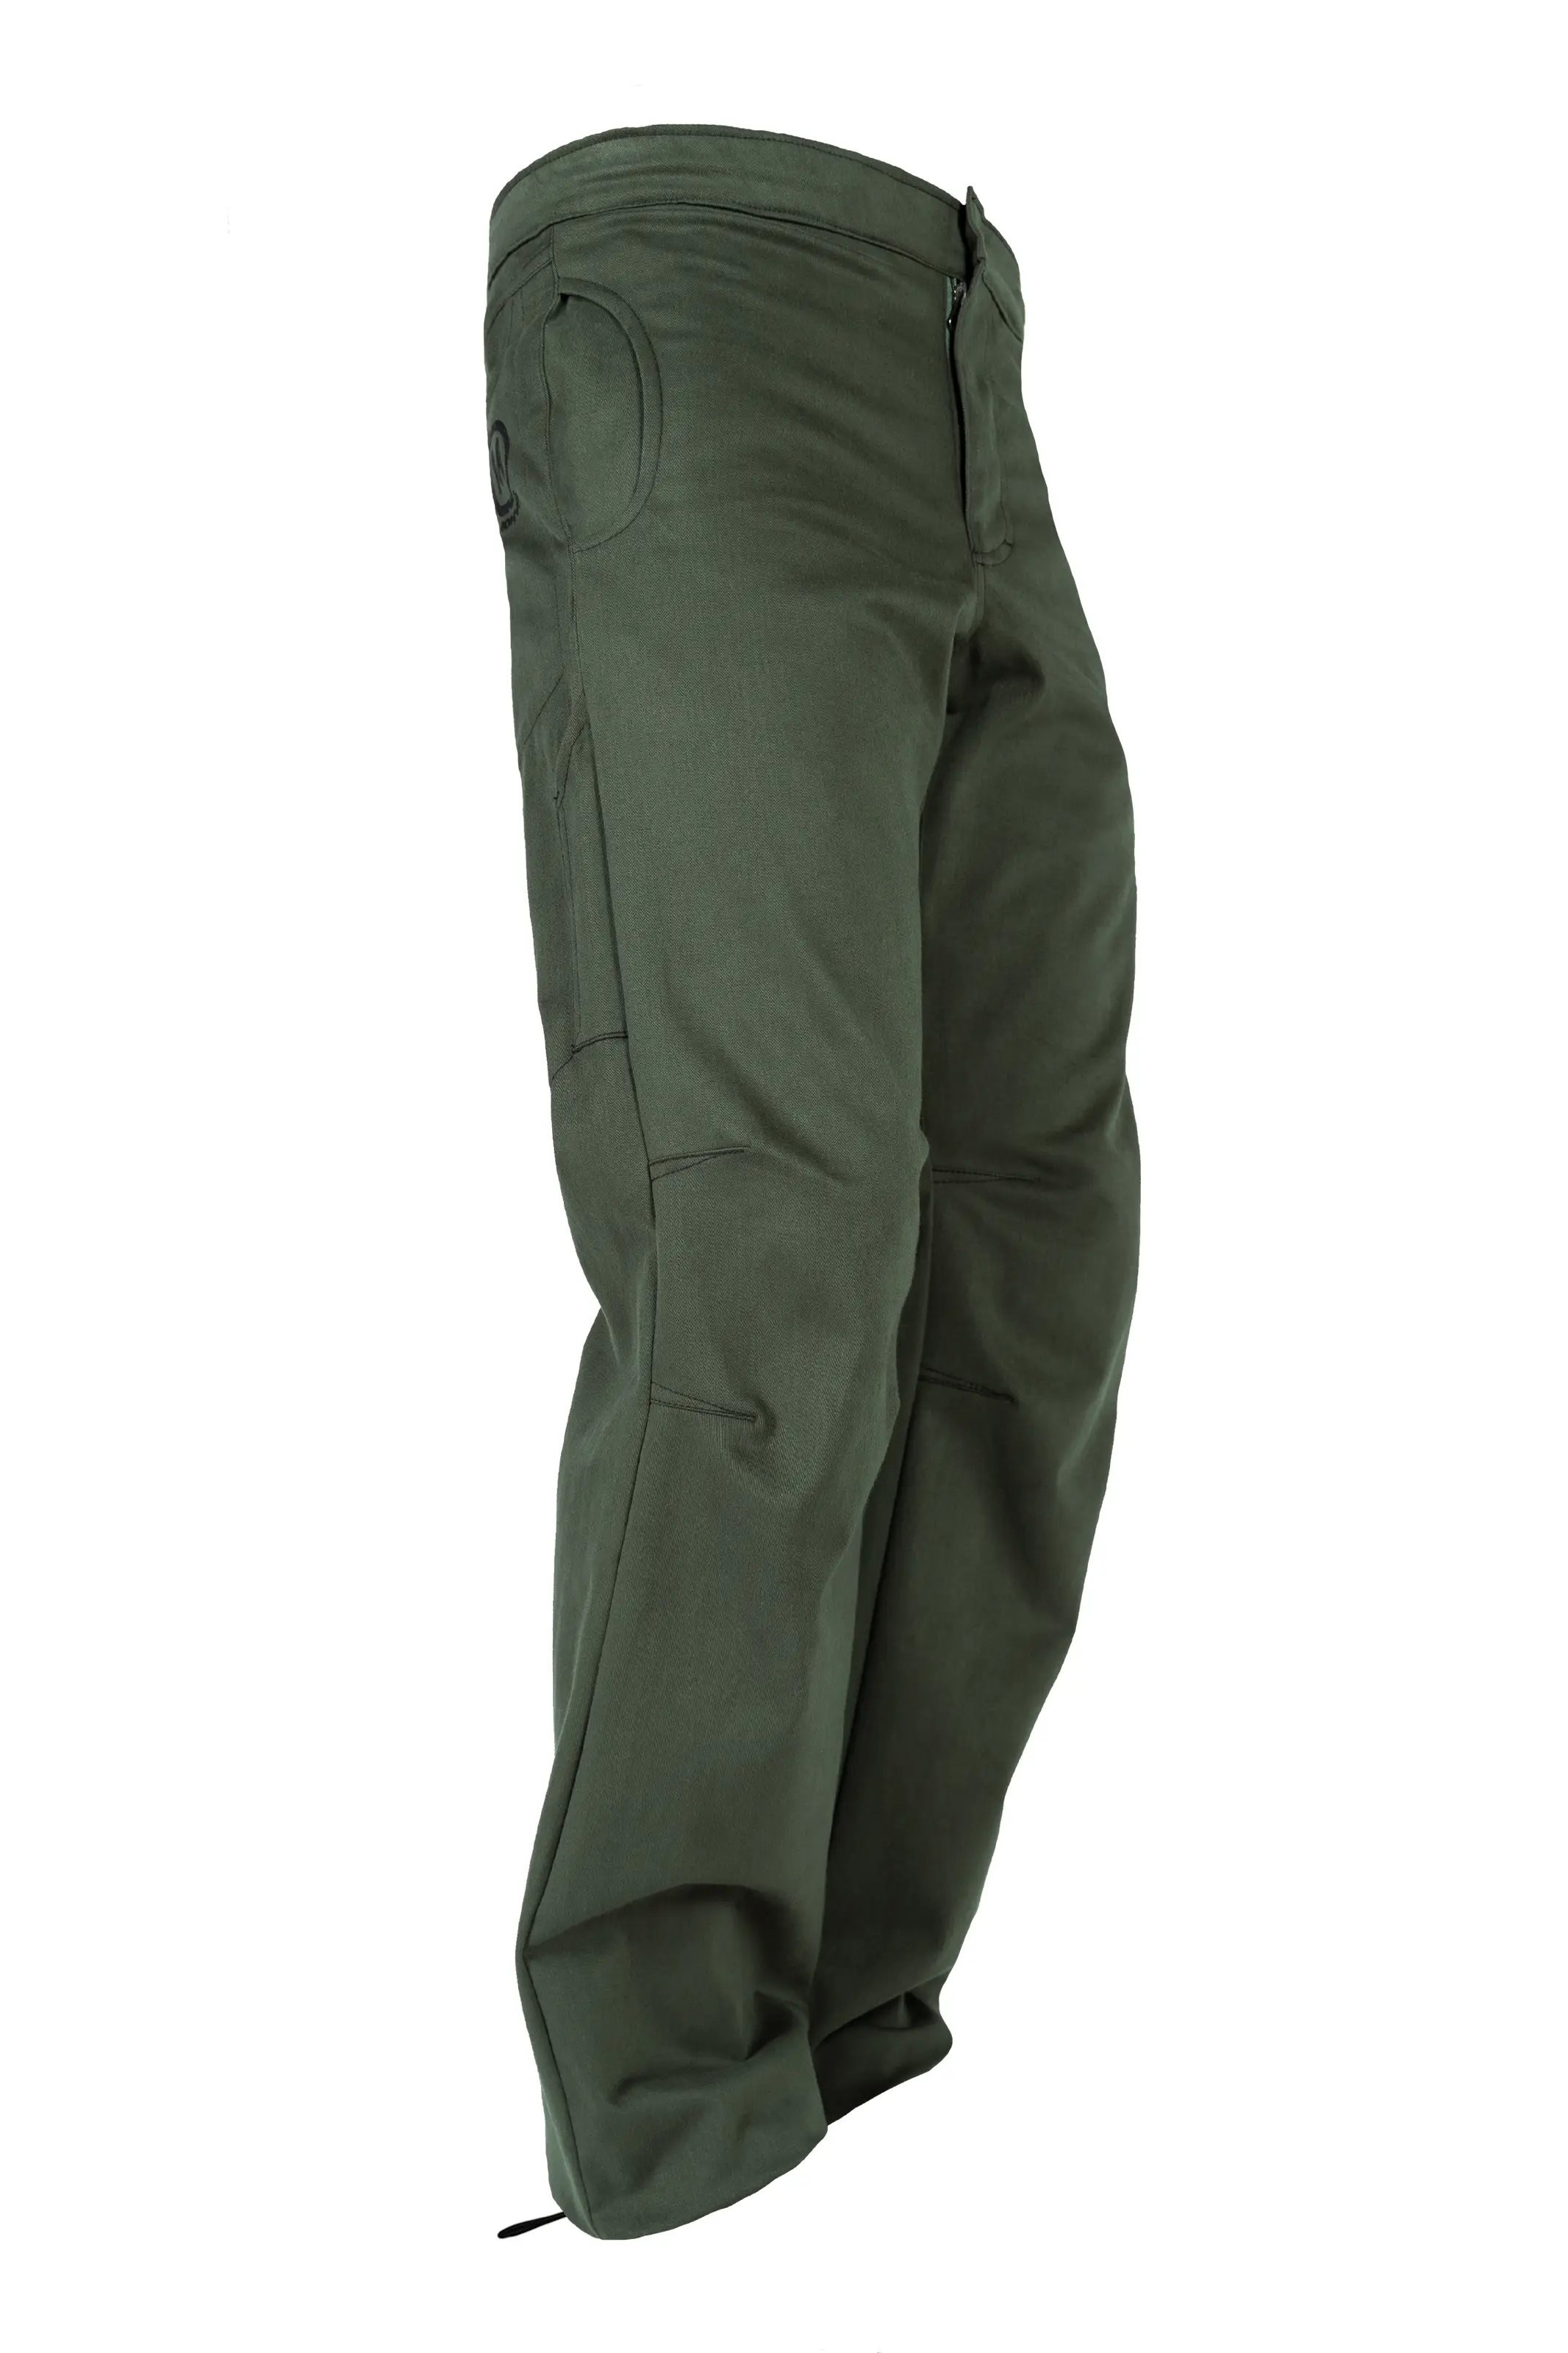 Men's climbing trousers - forest green - CLYDE Monvic